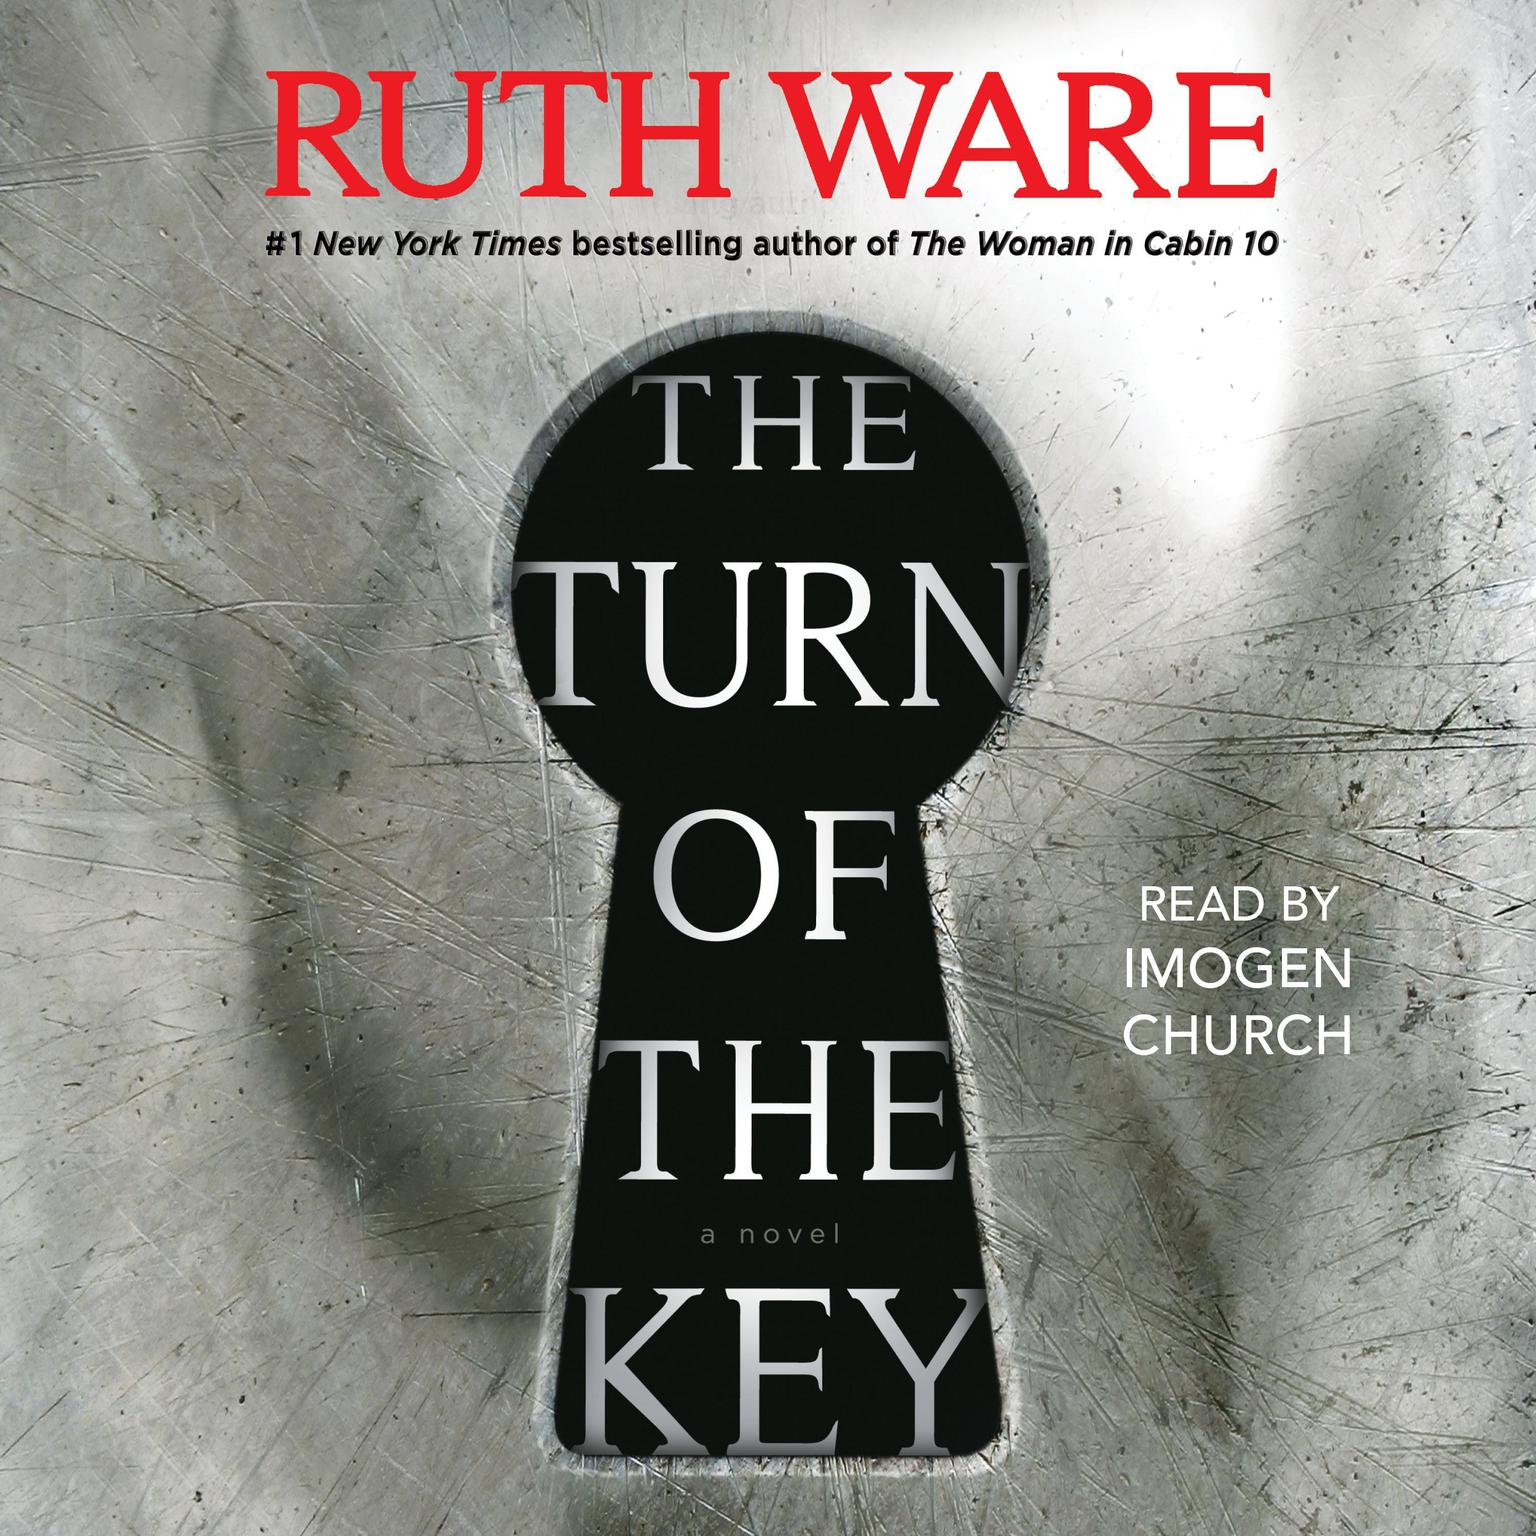 The Turn of the Key Audiobook, by Ruth Ware